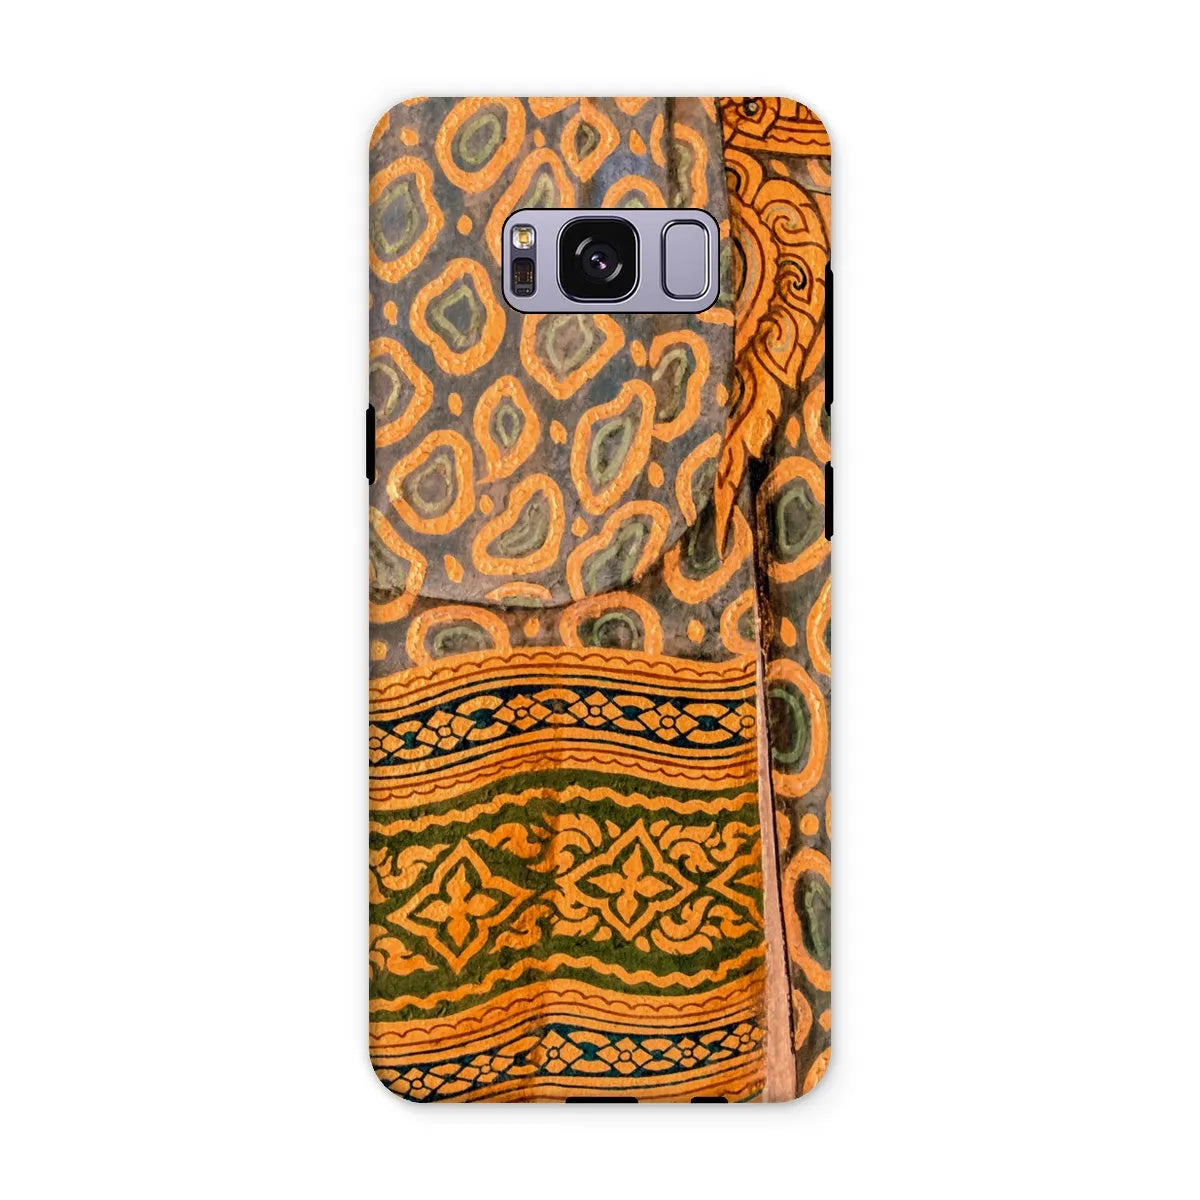 Lady In Waiting - Thai Aesthetic Art Phone Case - Samsung Galaxy S8 Plus / Matte - Mobile Phone Cases - Aesthetic Art